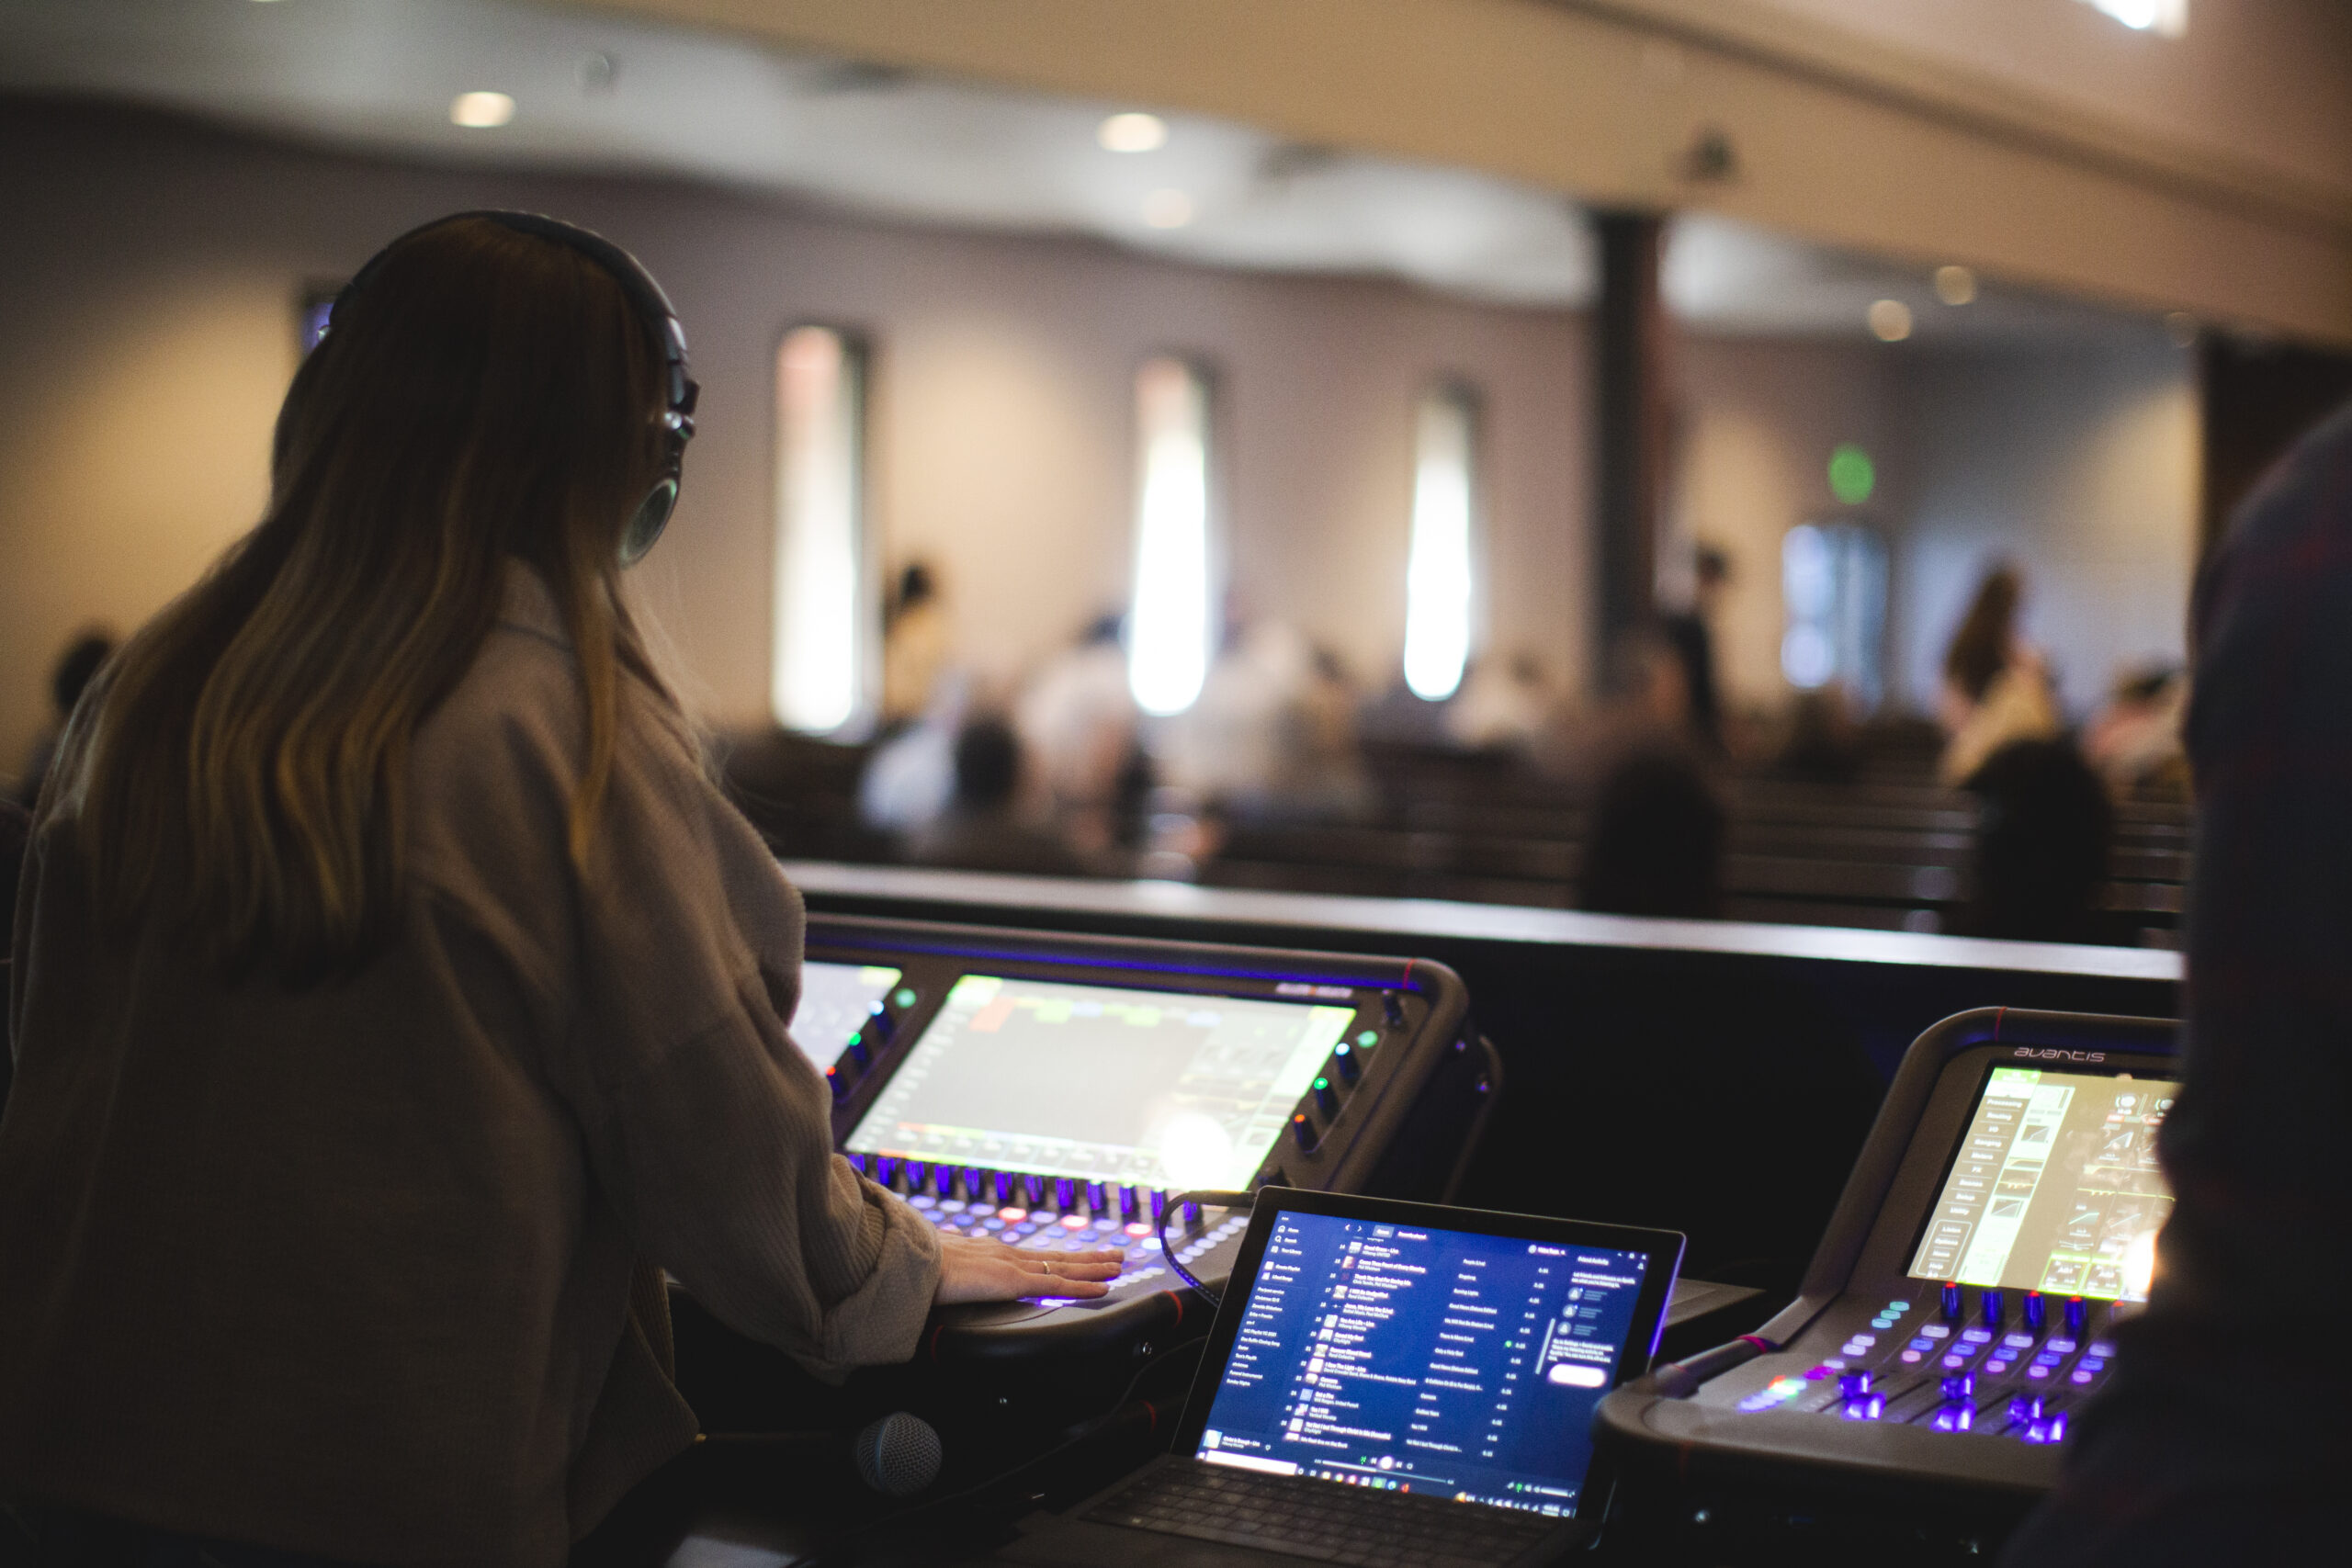 Two Avantis consoles in use at Calvary Chapel